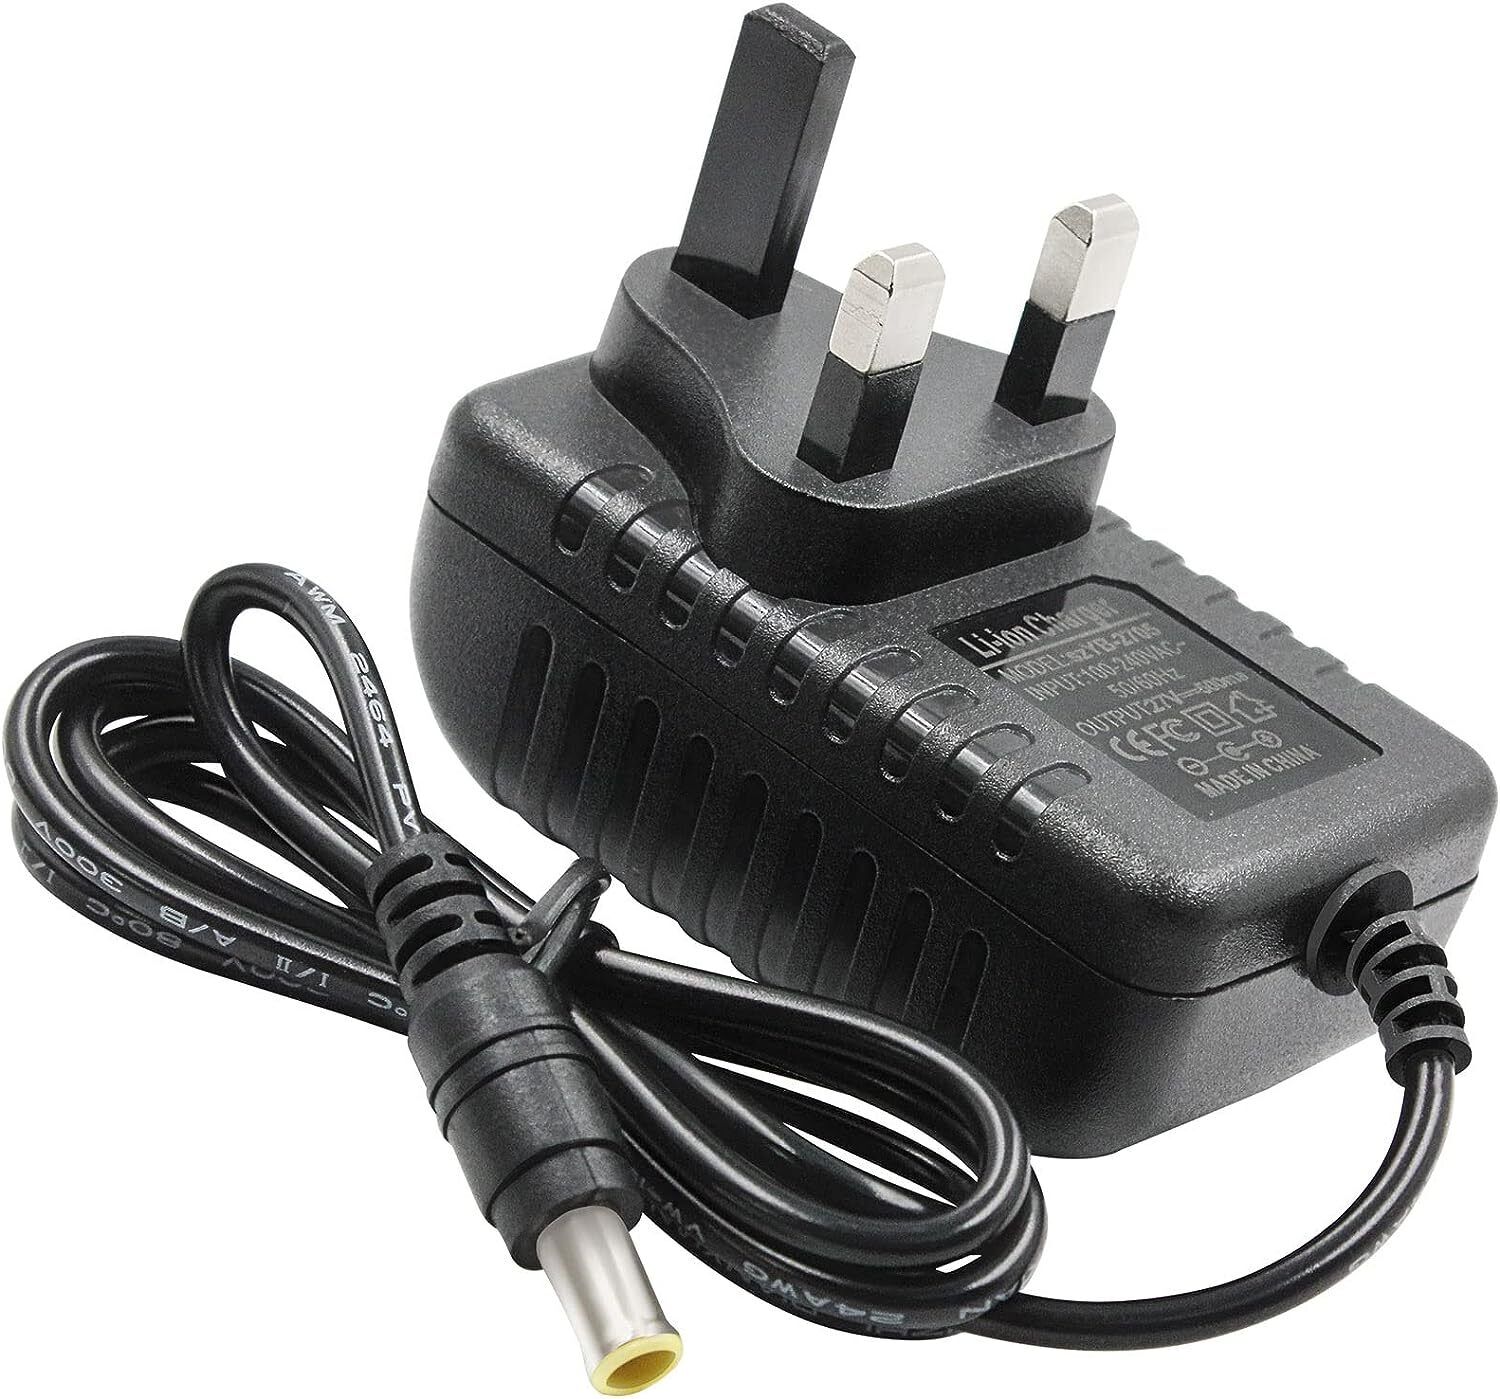 *Brand NEW*27V 500mA ac adapter Gtech AirRam Multi DM ATF AR K9 Series Vacuum Battery Charger Power Supply